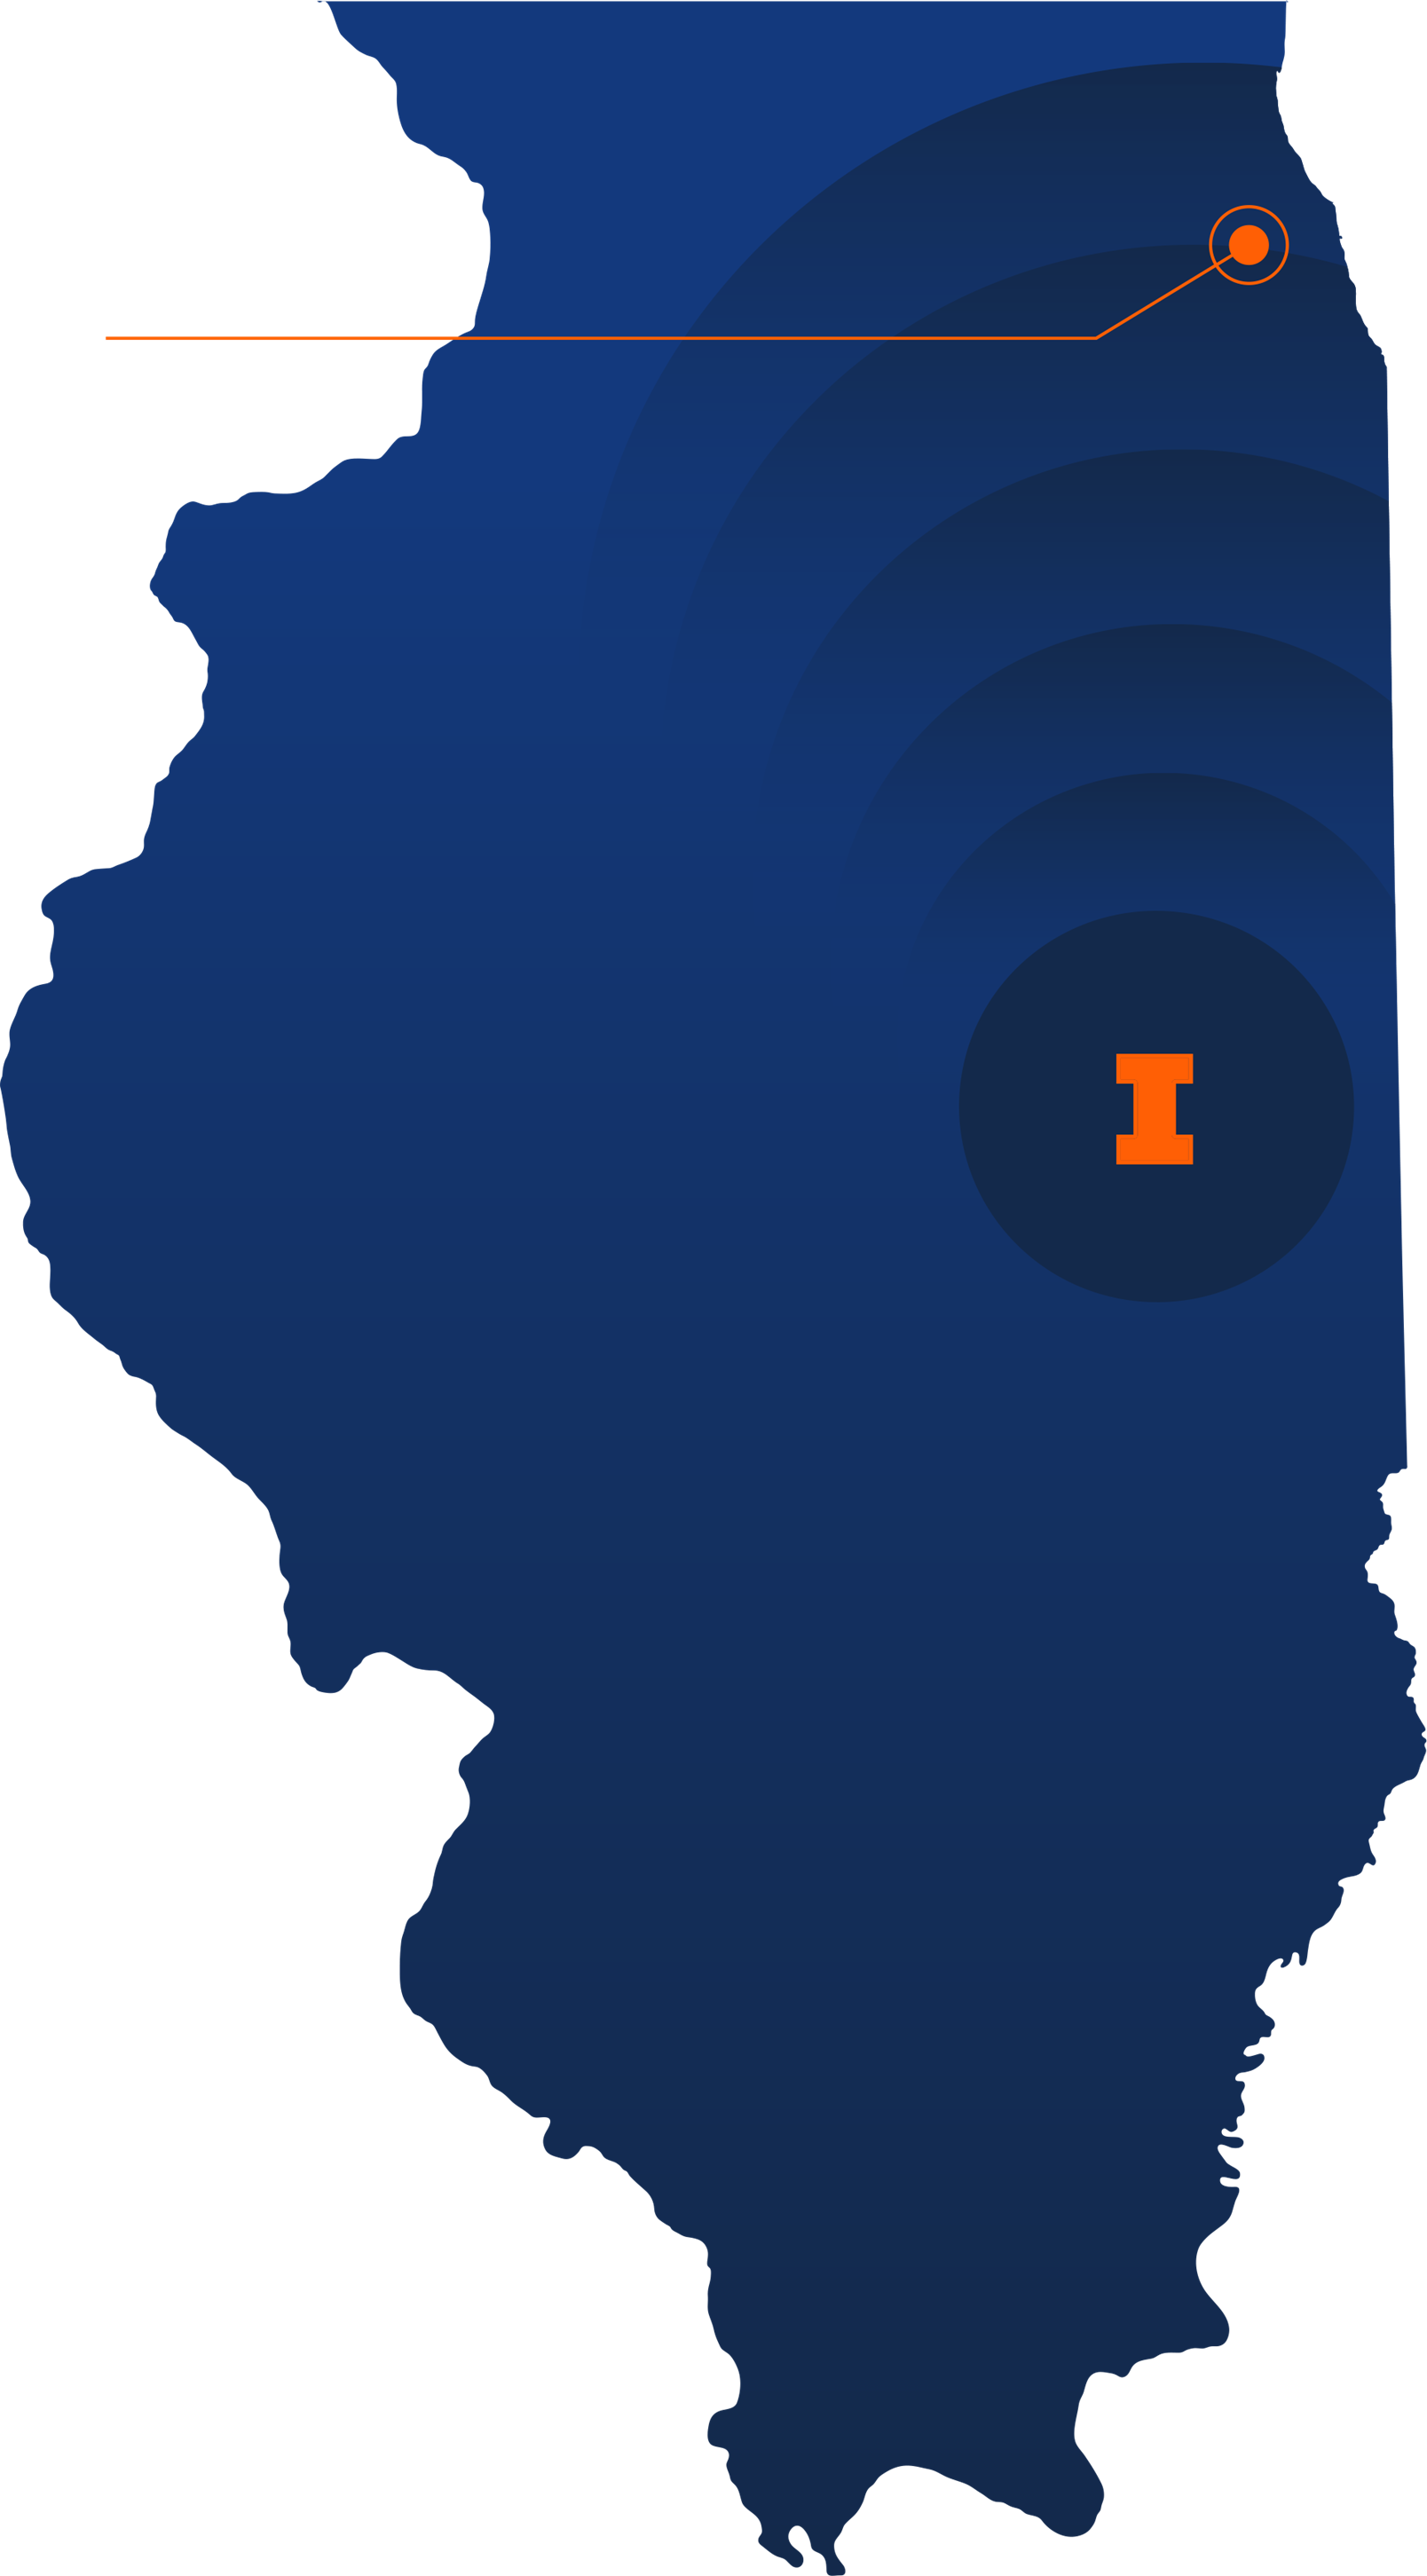 map of Illinois with University of Illinois and Chicago pinned